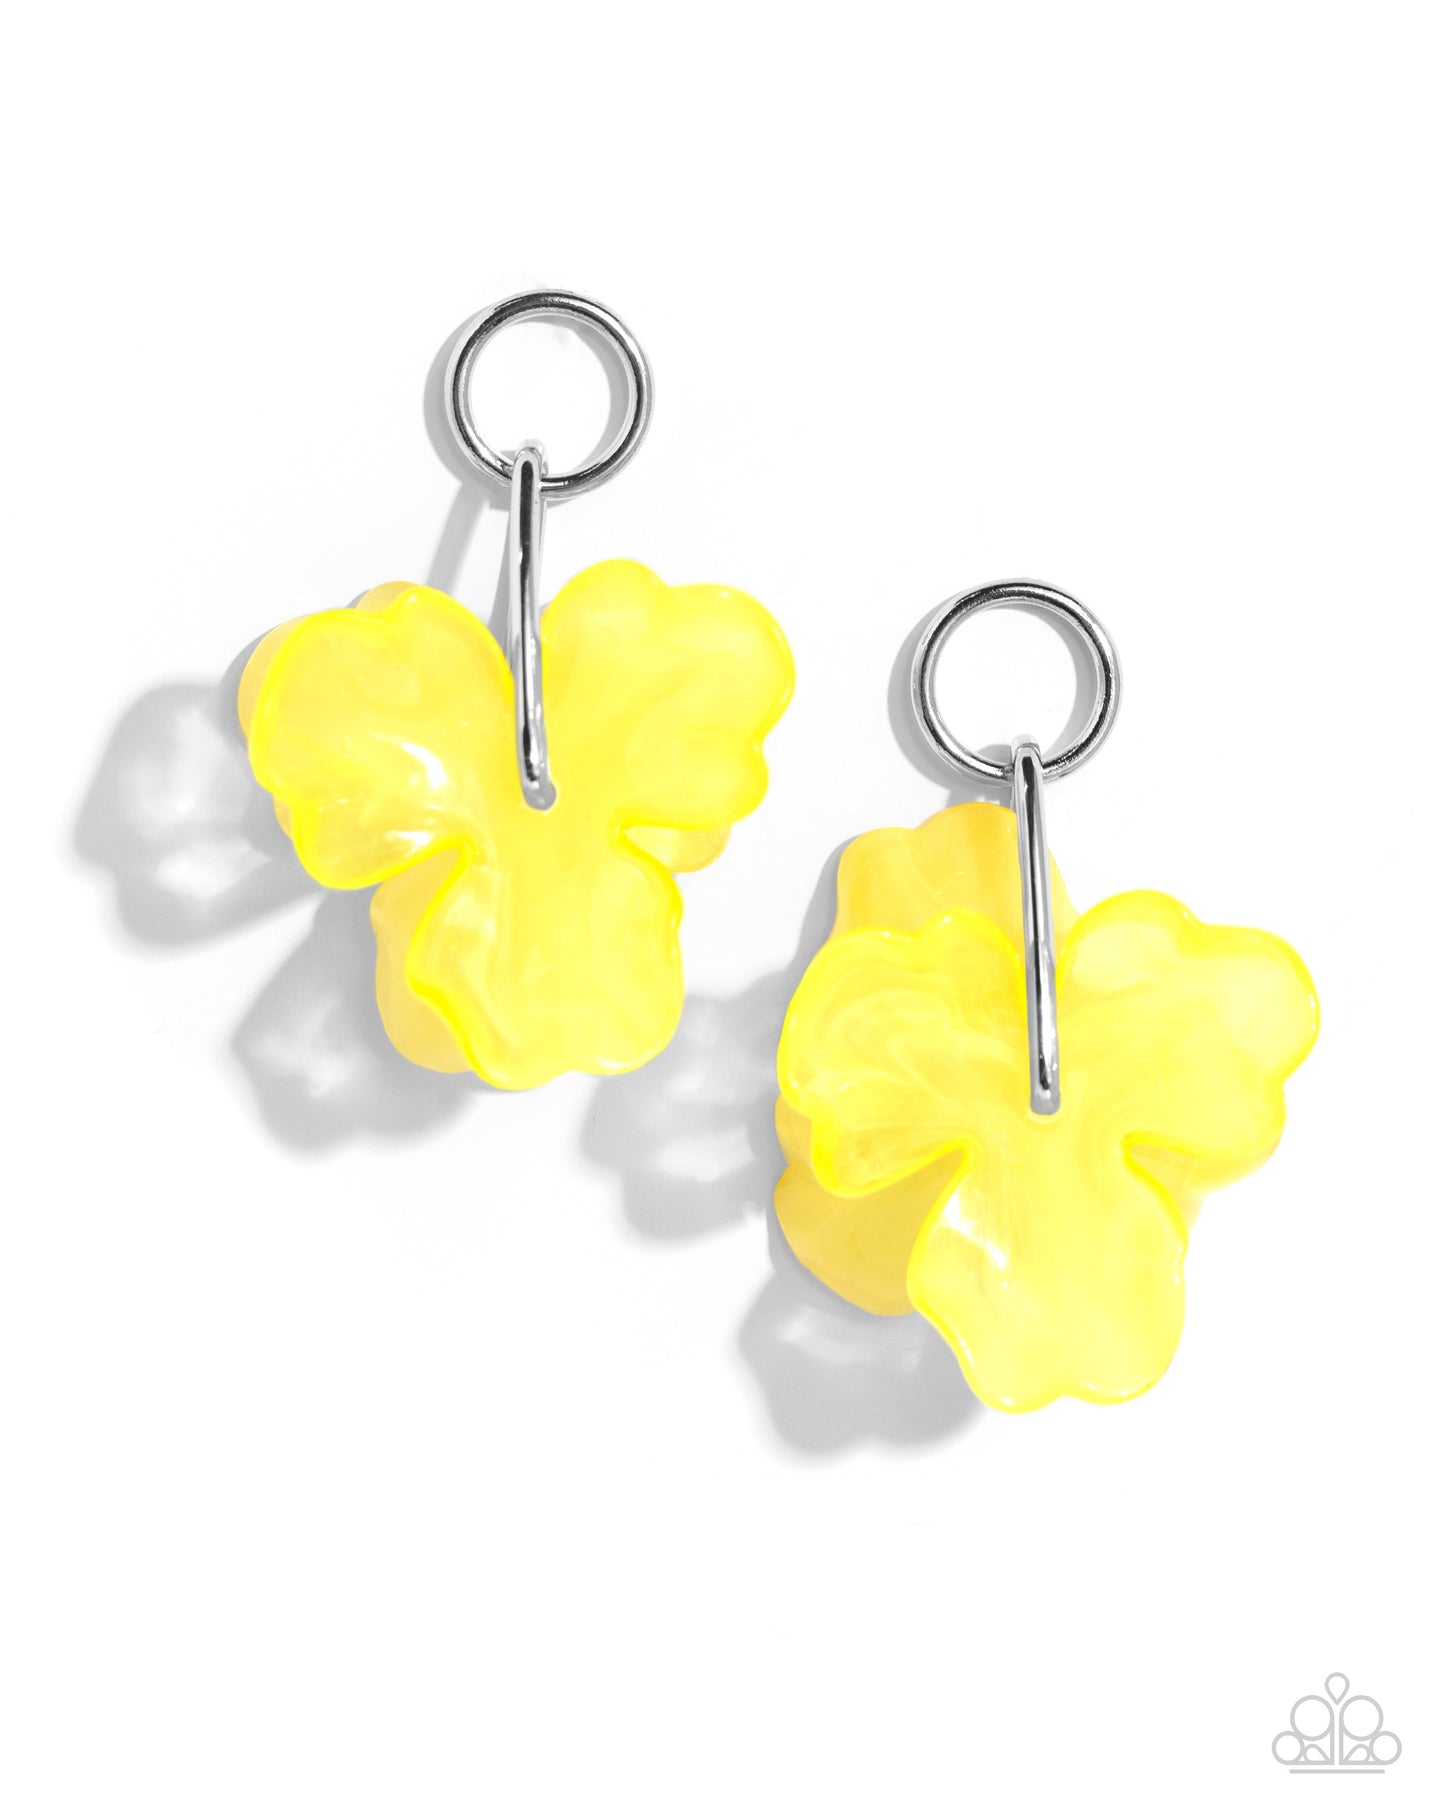 <p>A high-sheen silver hoop gives way to acrylic Primrose and Lemon flowers that are threaded through the center of a hoop by a silver attachment for a whimsical, fun pop of color along the ear. Earring attaches to a standard post fitting.</p> <p><i> Sold as one pair of post earrings.</i></p>